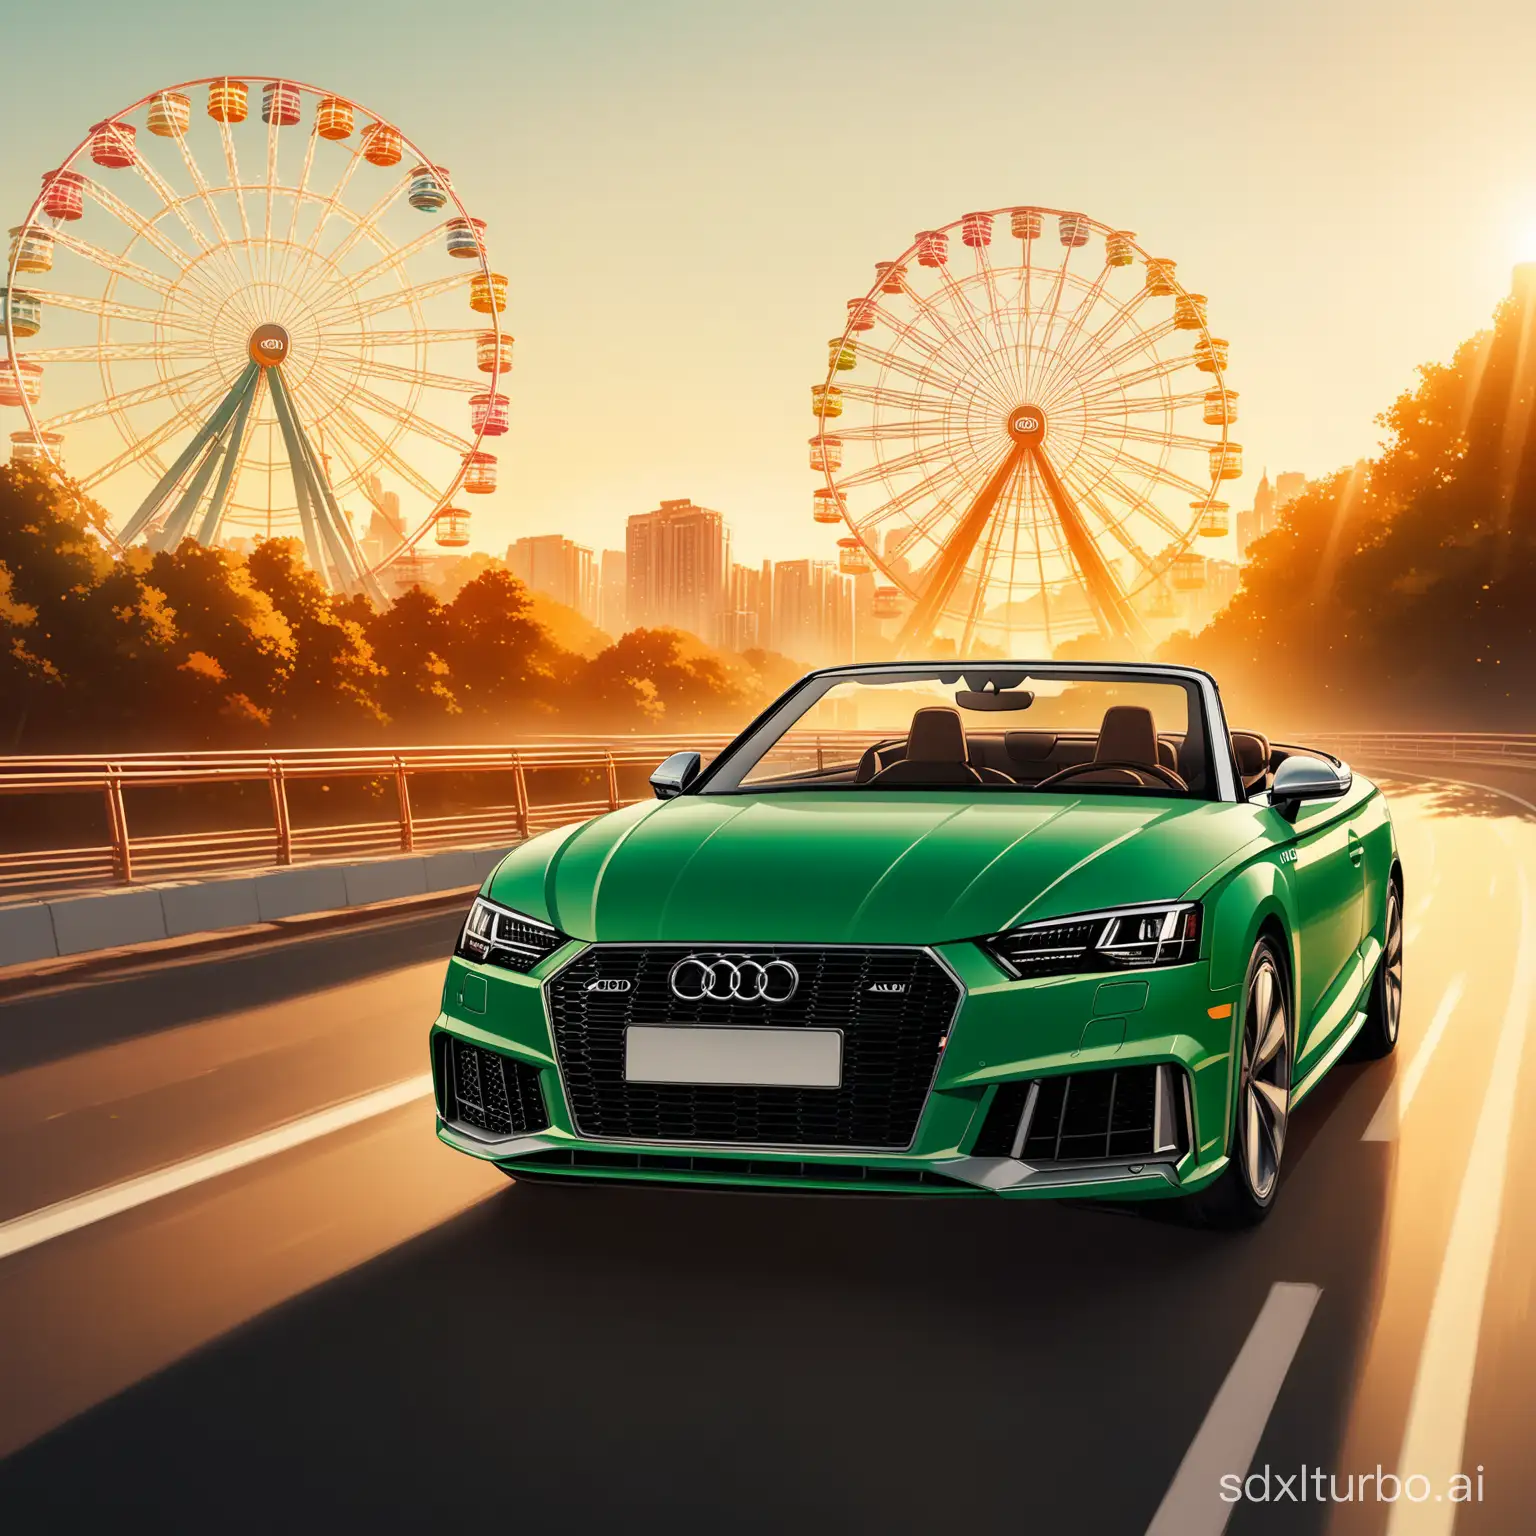 A green Audi convertible driving on the road with a background of a Ferris wheel, adding details, enhancing clarity, extremely high resolution, wallpaper, adding details, high resolution, detail enhancement, warm color tone, complete cinematic lighting background, close-up, frontal perspective, upper body, close-up,